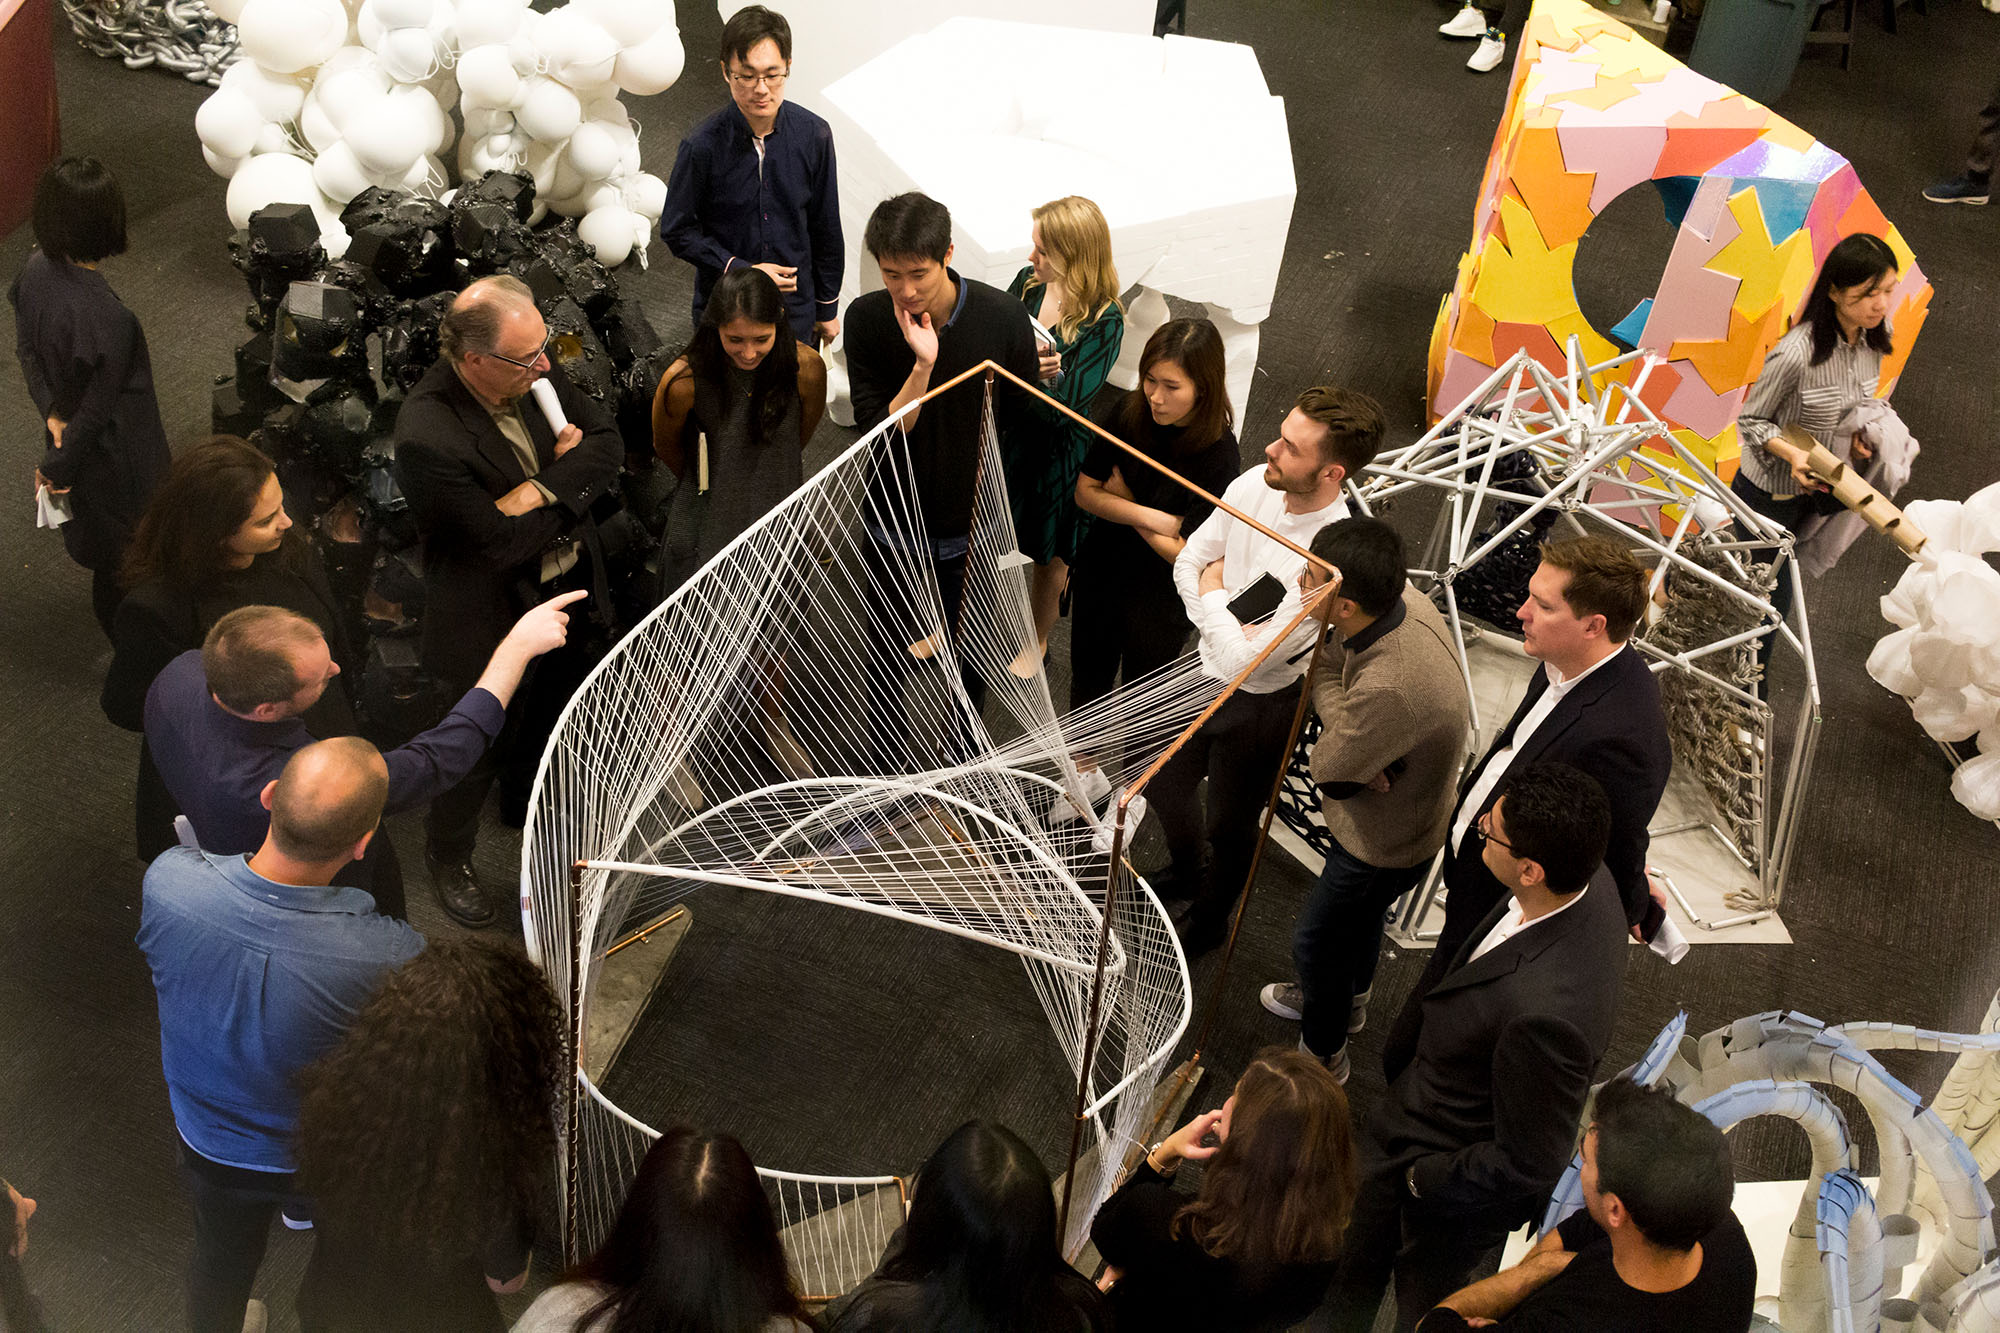 As seen from above, people gathered around structural designs at a party or event.